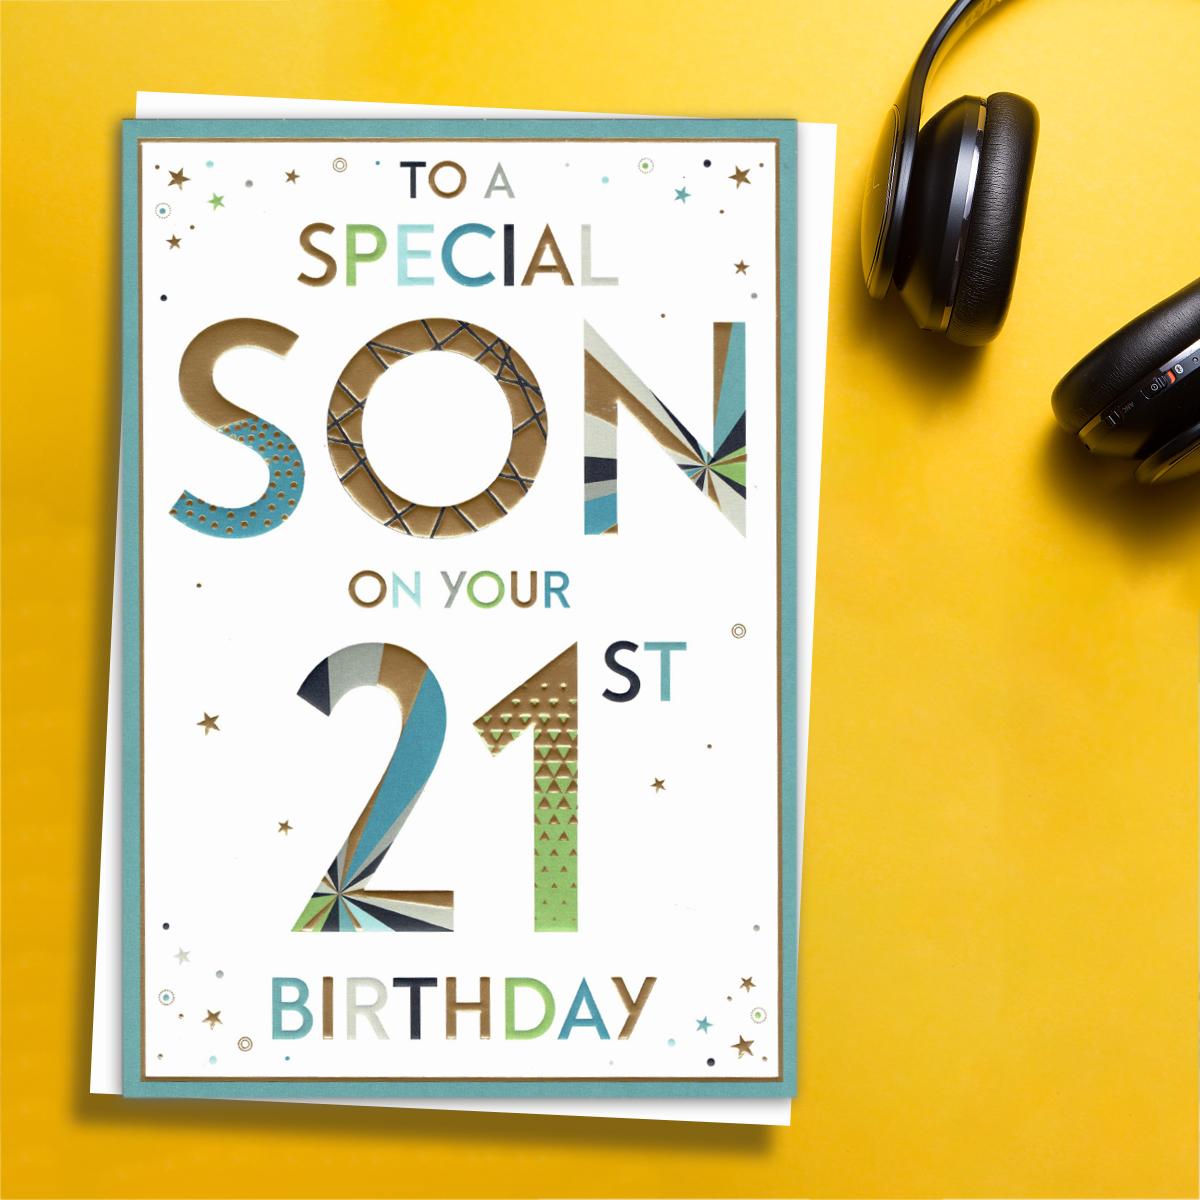 ' To A Special Son On Your 21st Birthday' Card Featuring Multi Coloured Lettering With Gold Foil Detail. Complete With White Envelope And Colour Printed Insert.